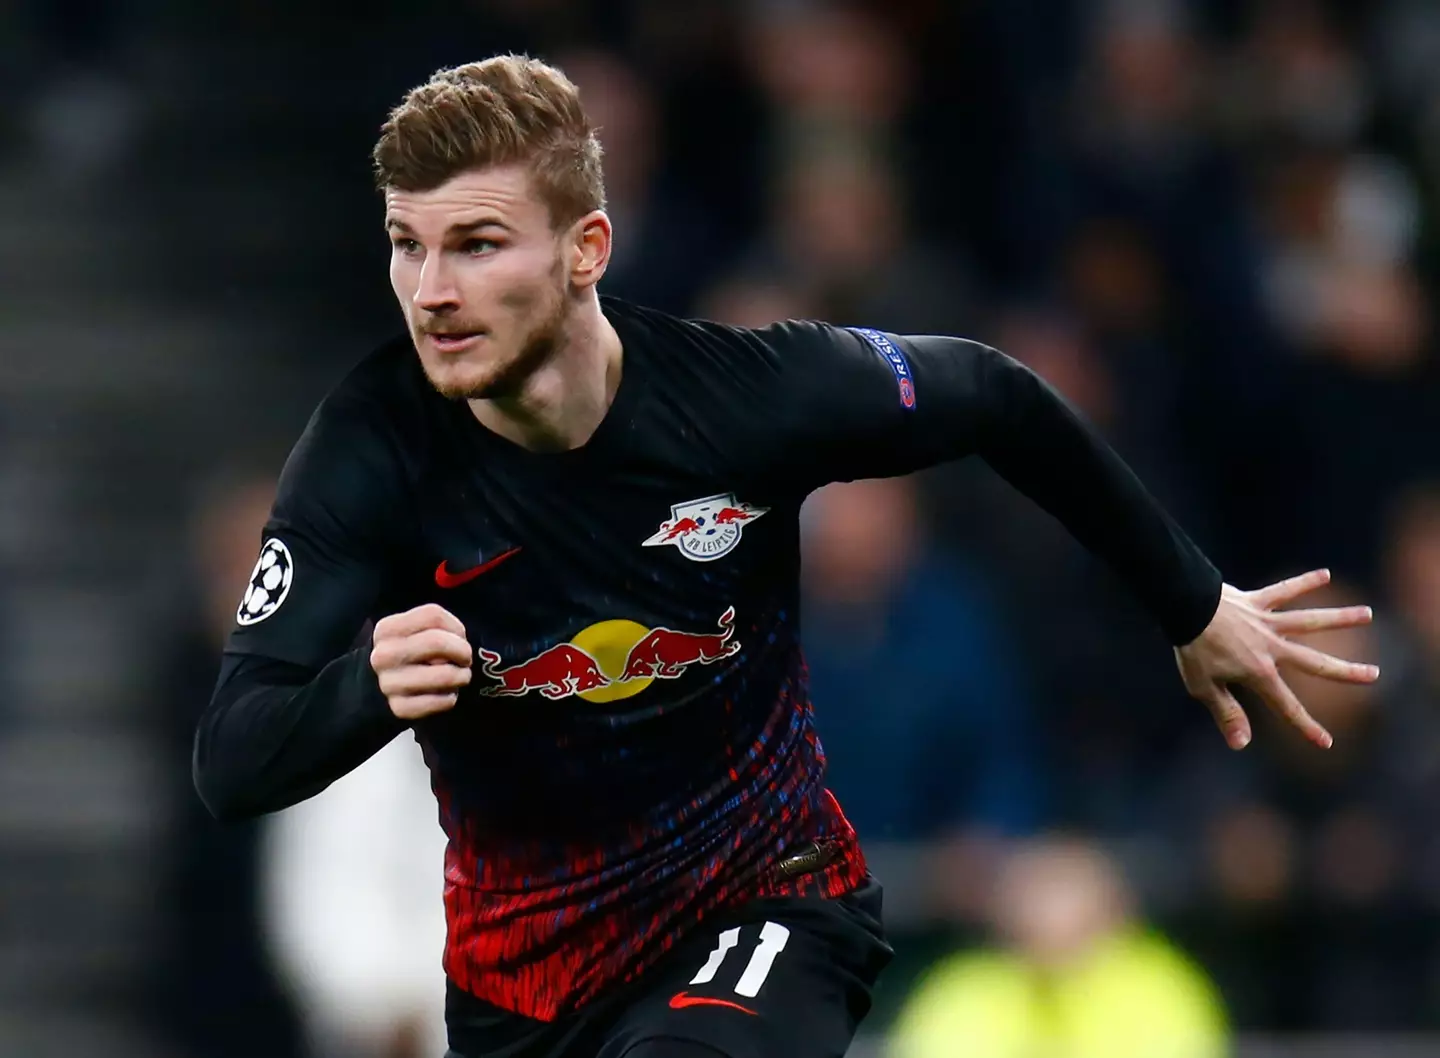 Timo Werner at RB Leipzig. (Alamy)